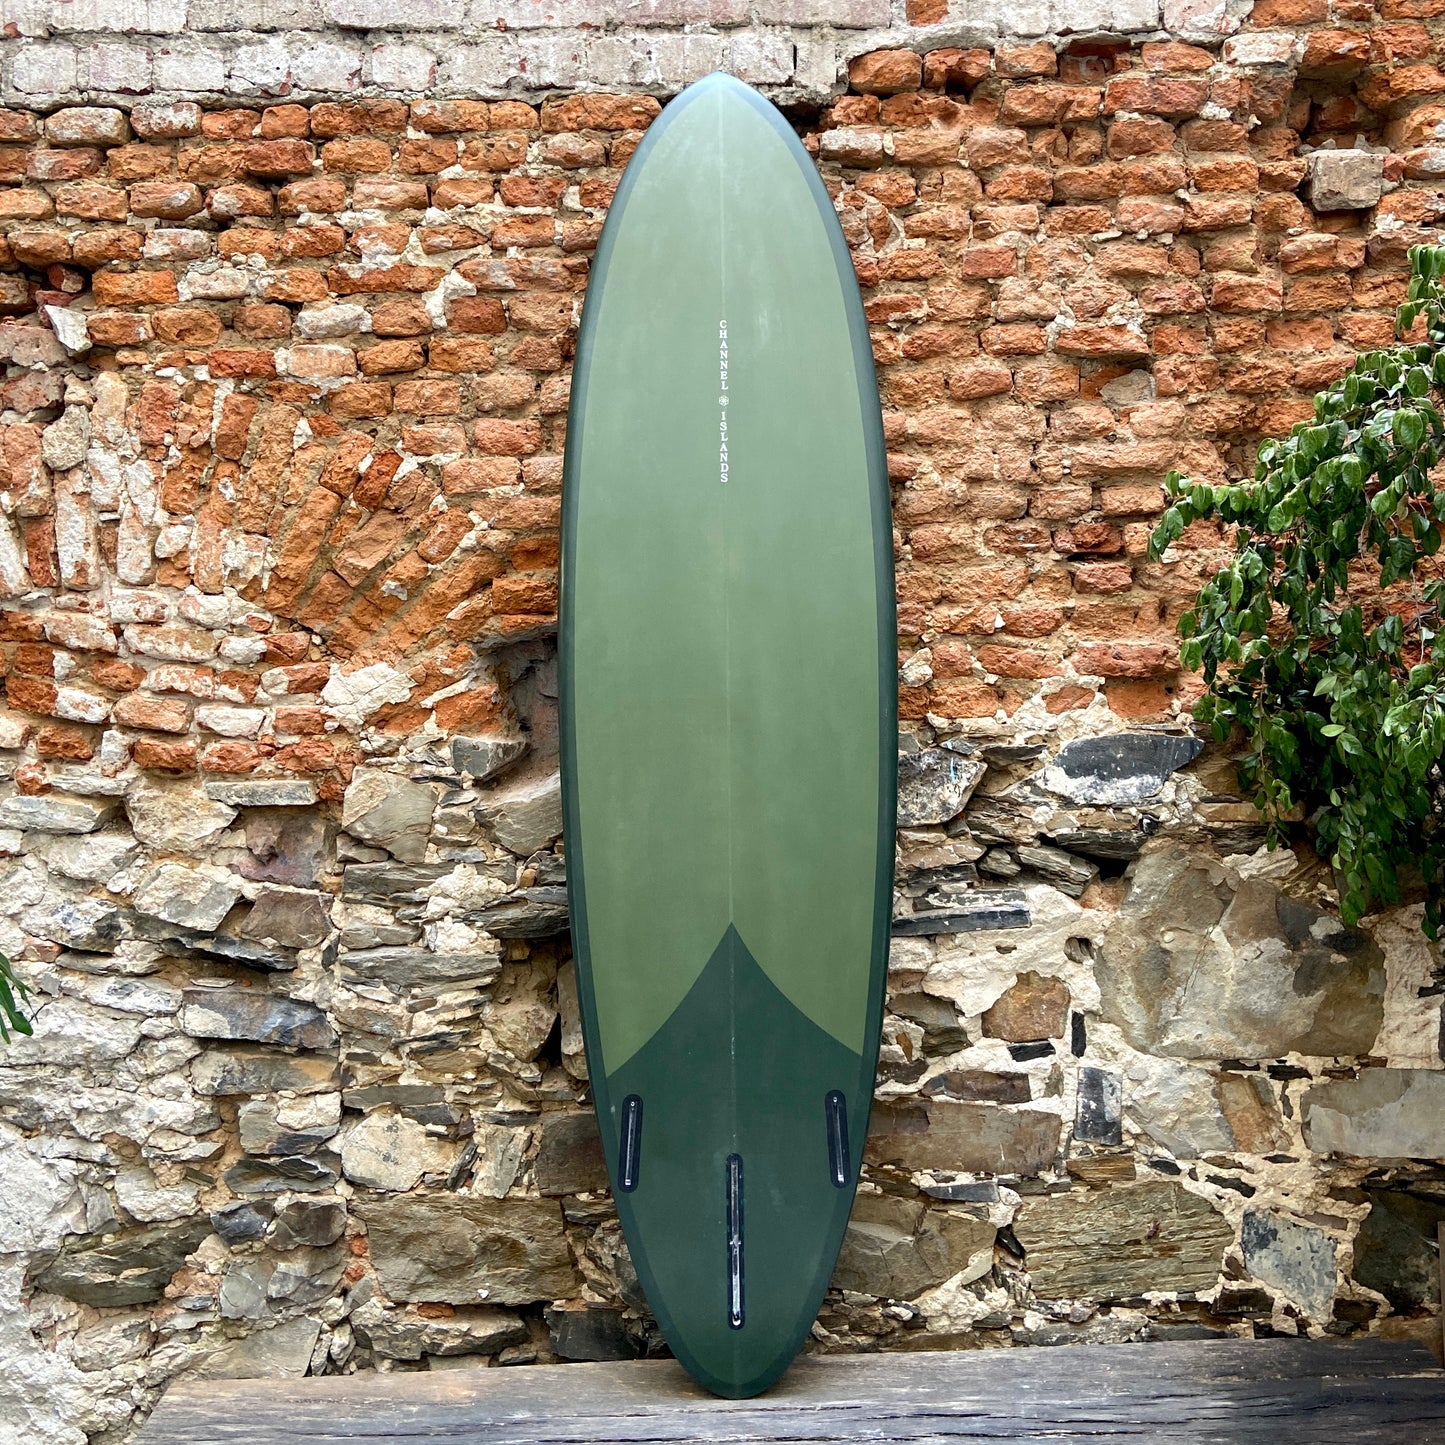 CHANNEL ISLANDS MID 7'0" 21 1/8" 2 3/4" 44.9L ARMY GREEN